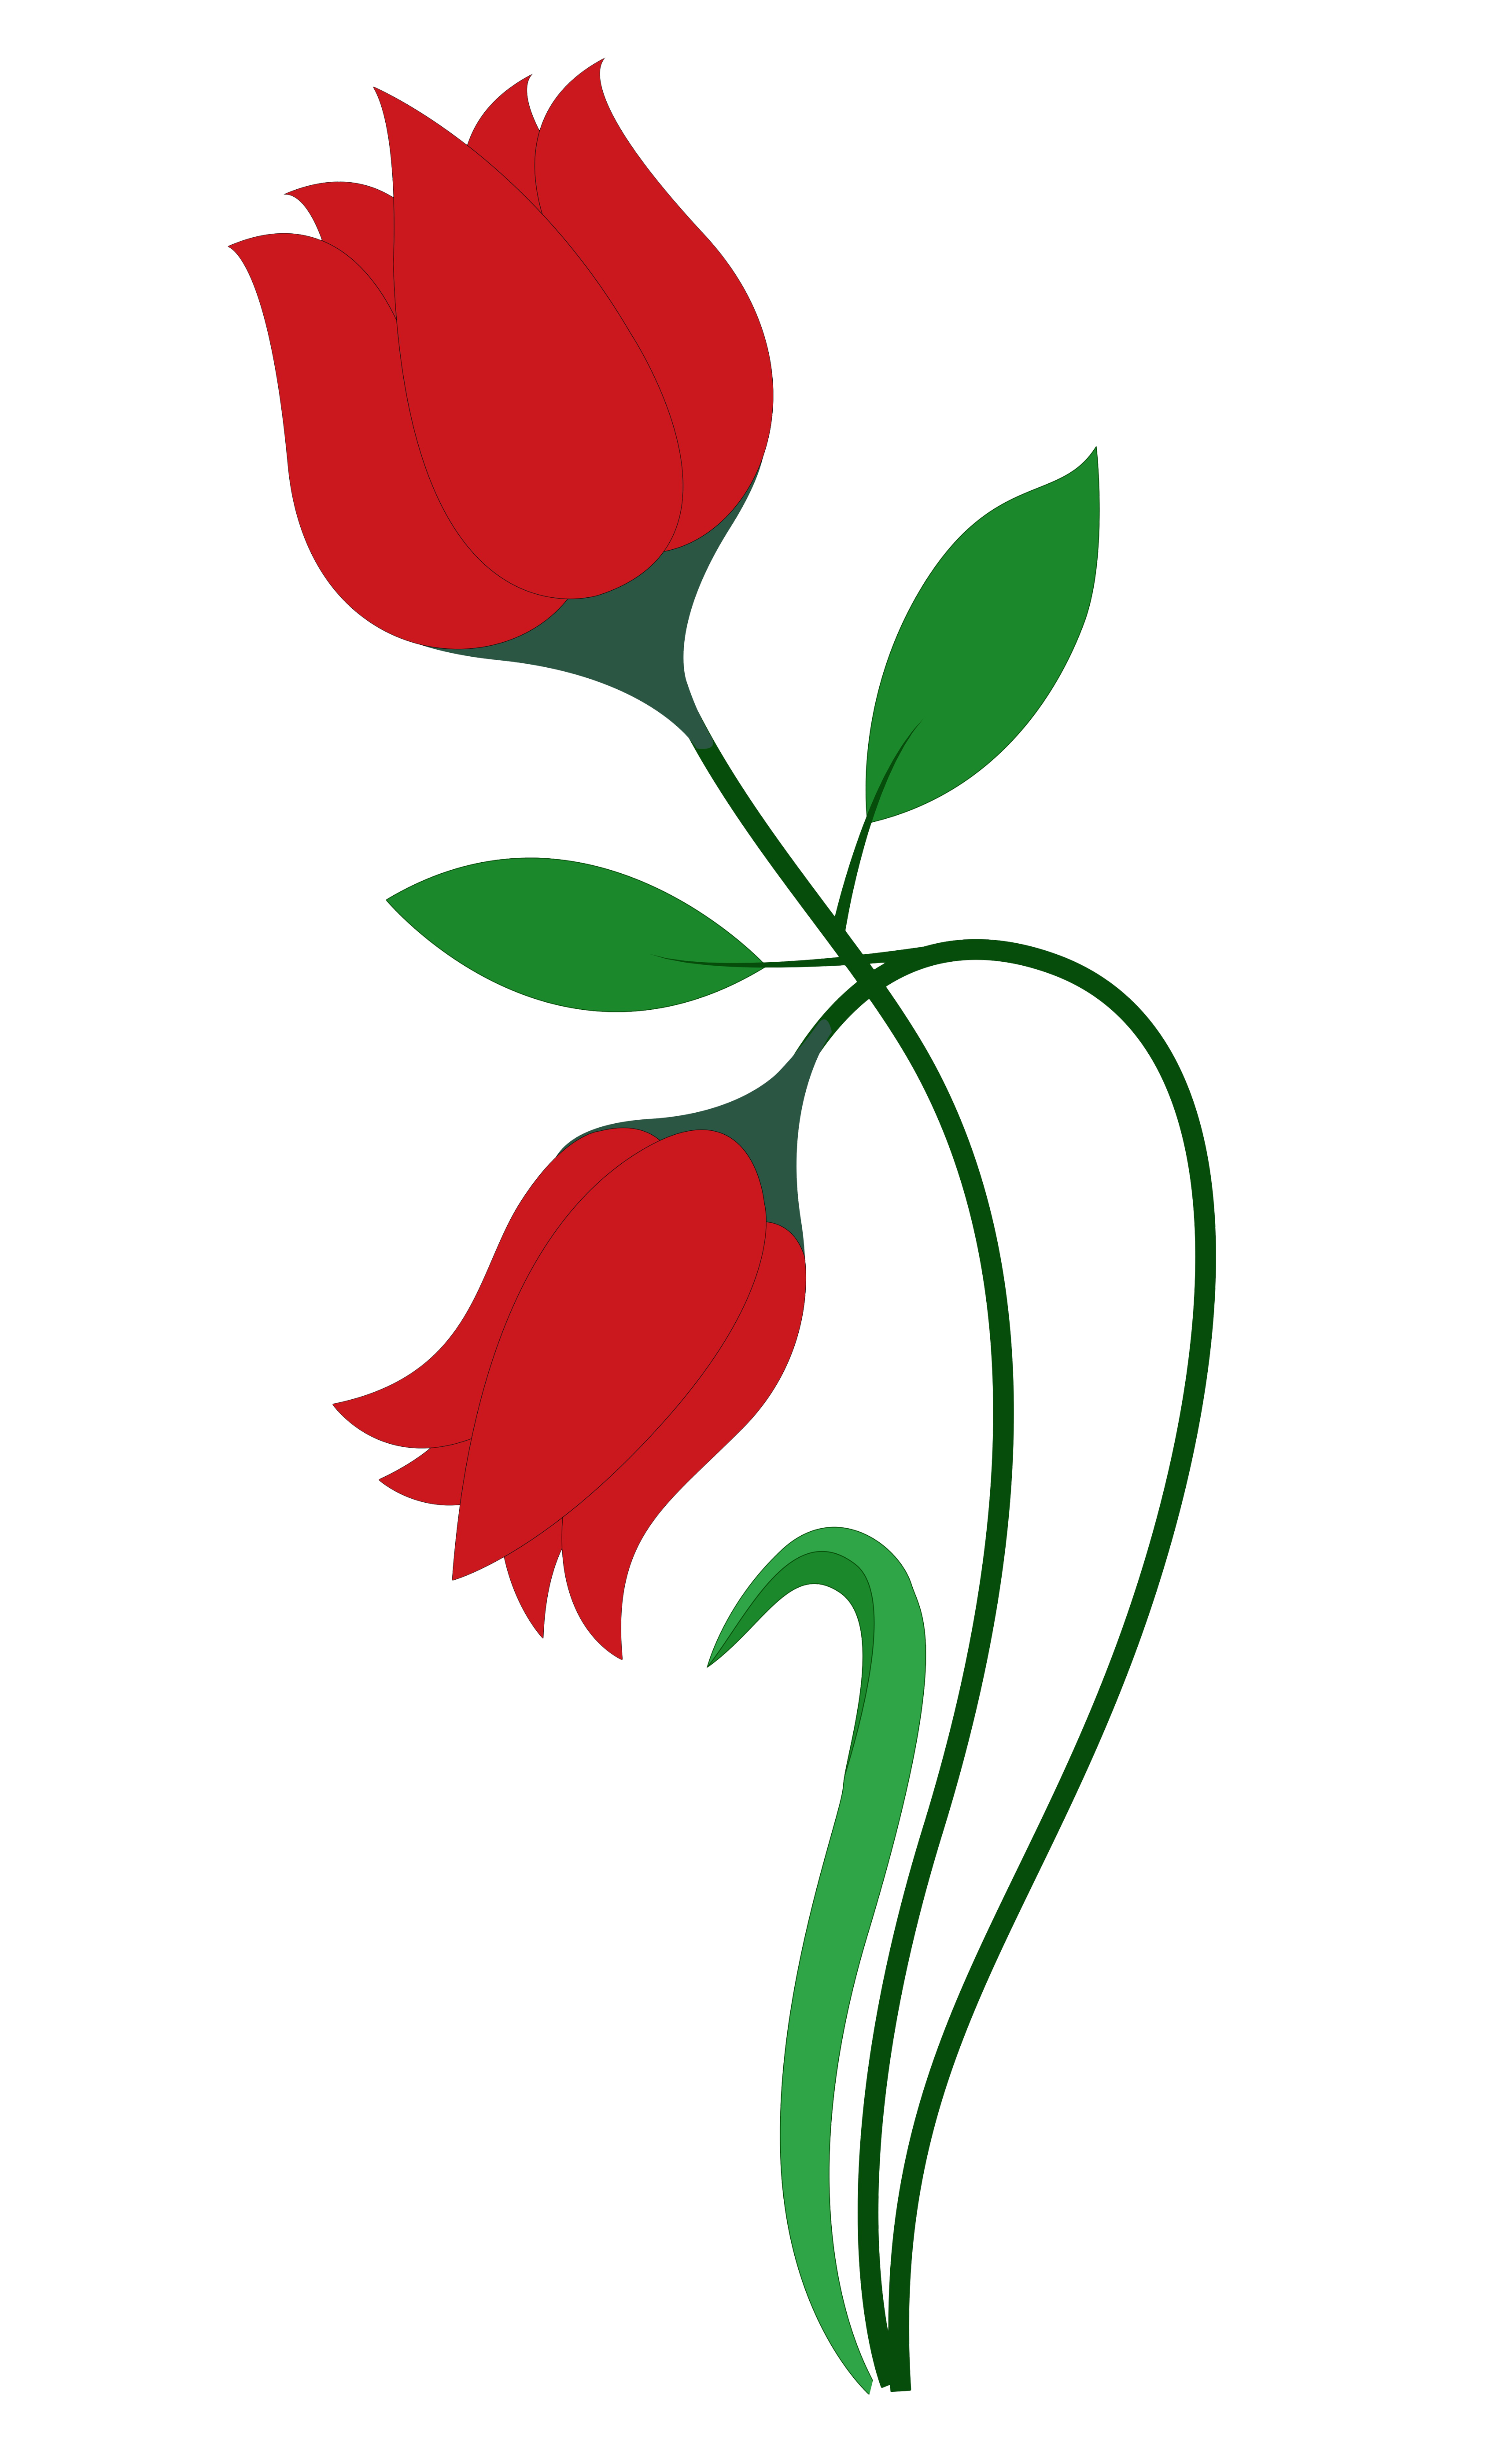 Free Vector Rose Png, Download Free Vector Rose Png png images, Free ...